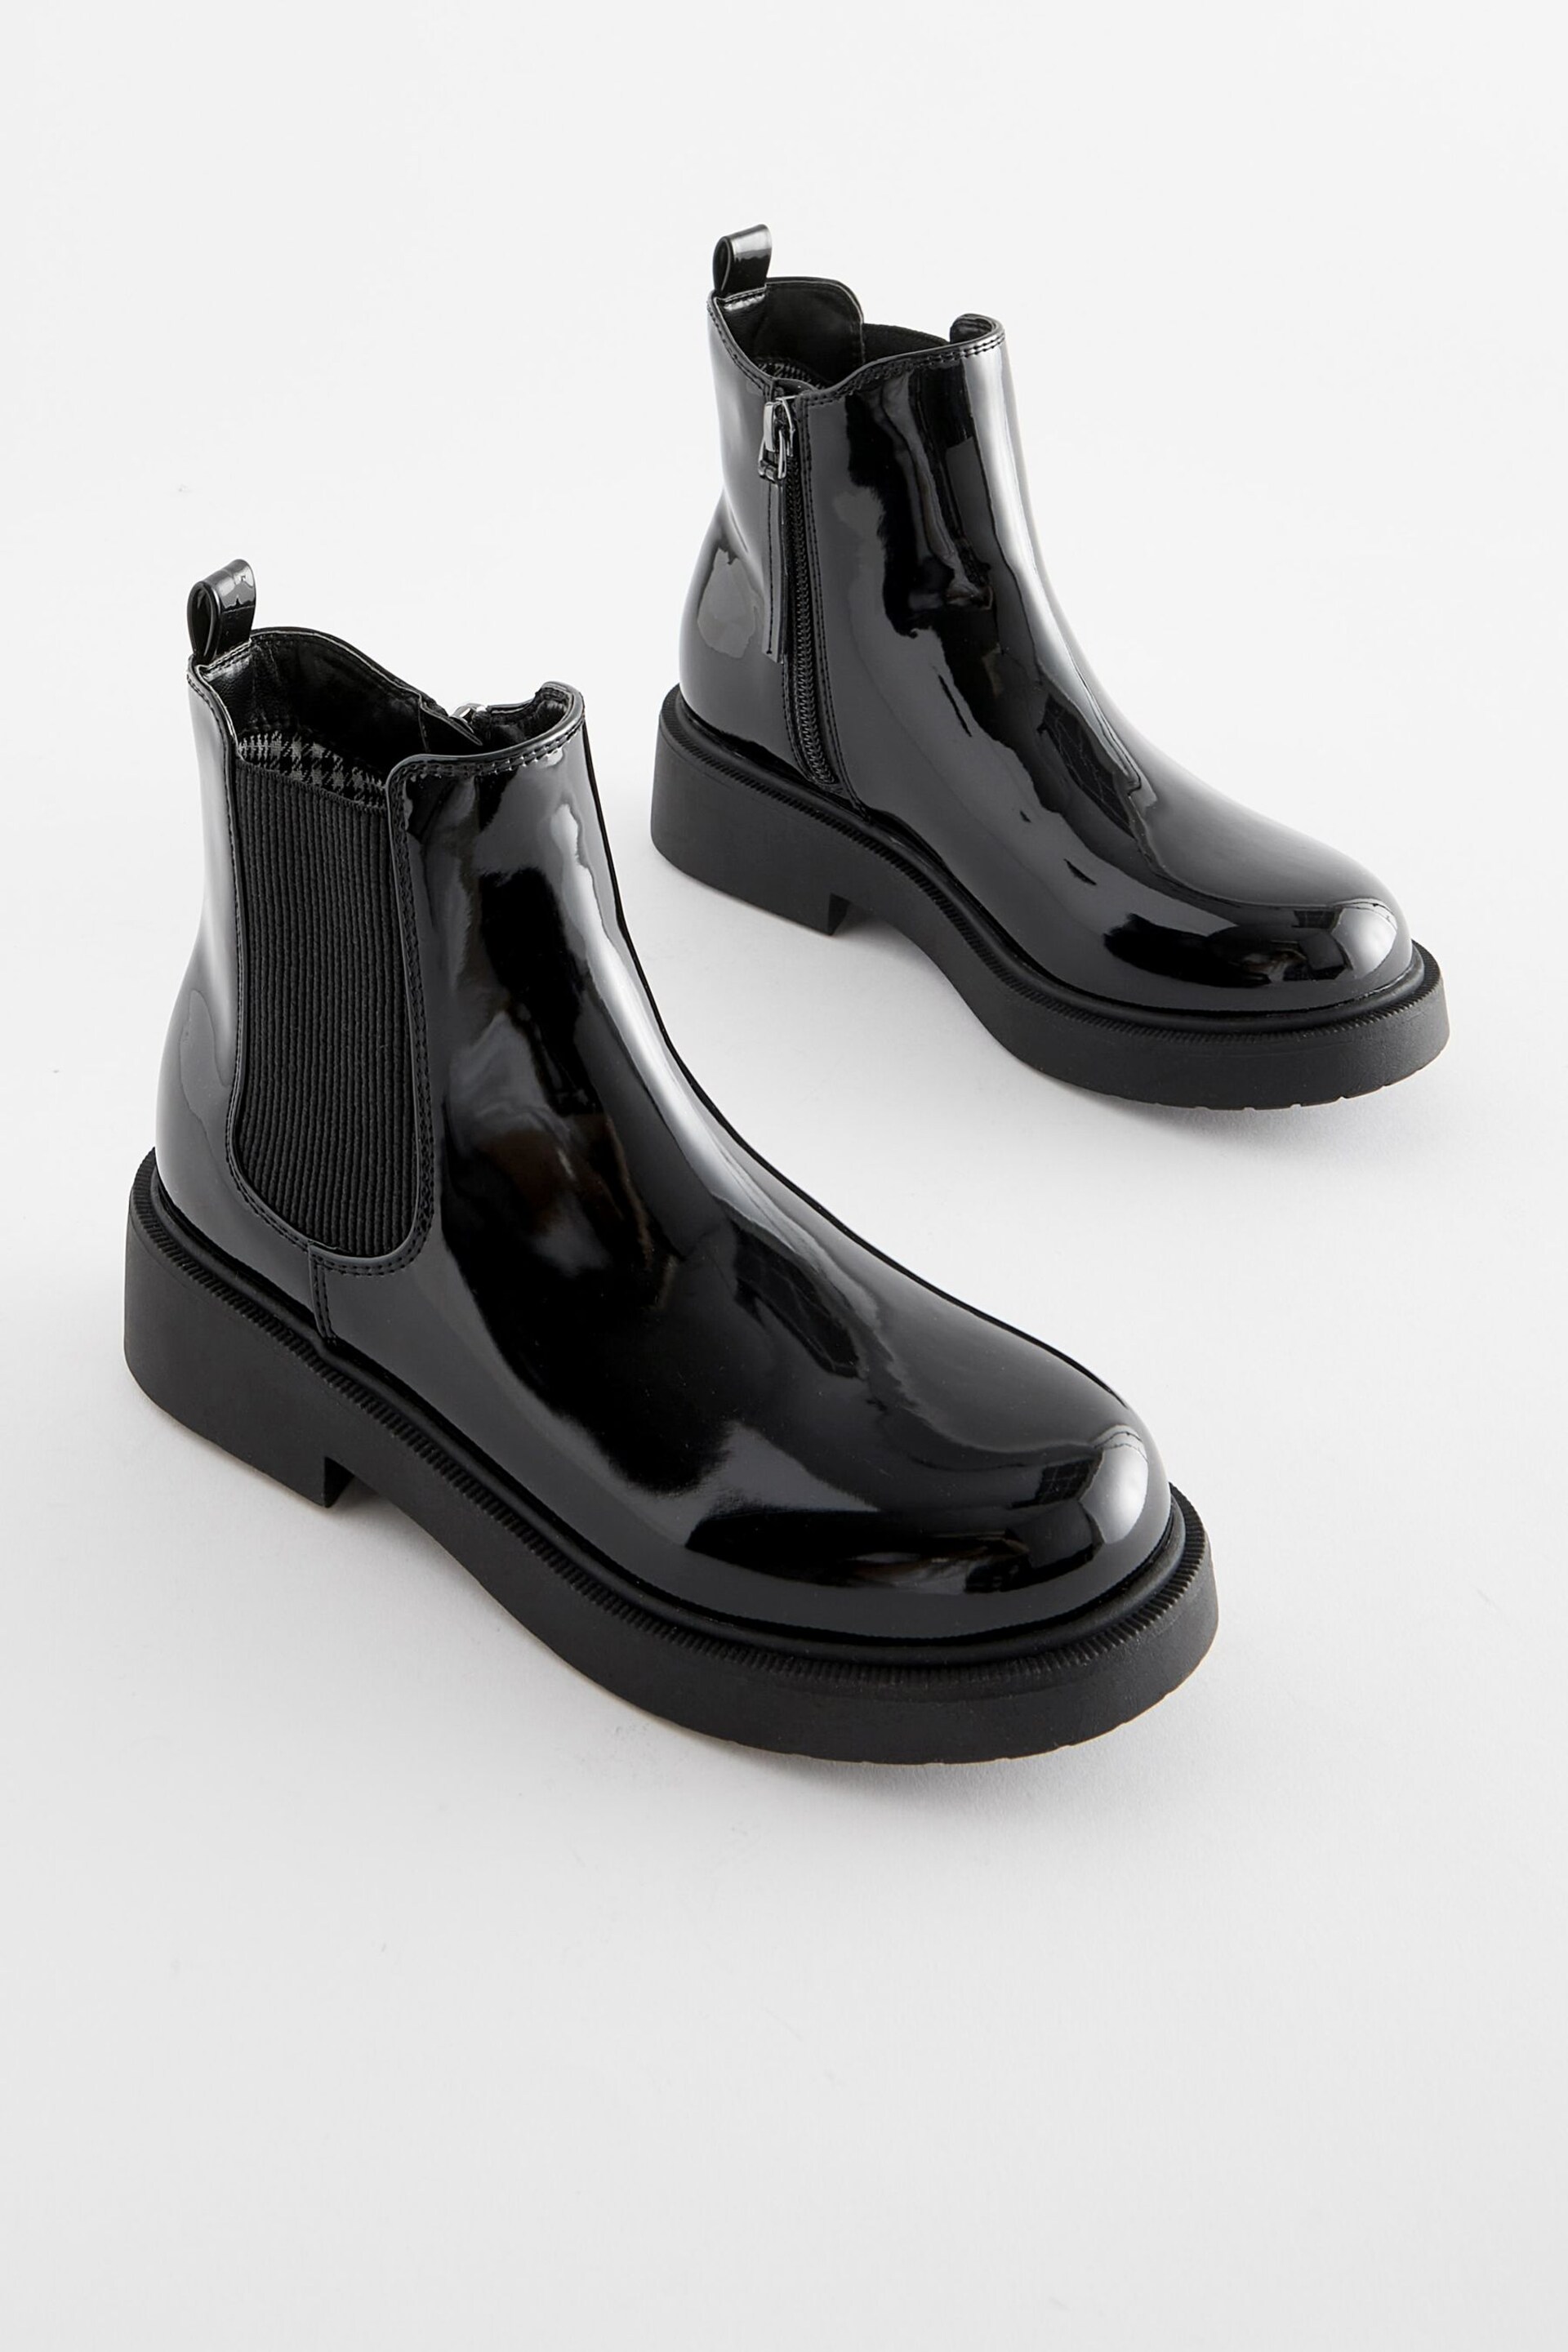 Black Patent Wide Fit (G) Chunky Chelsea Boots - Image 1 of 5